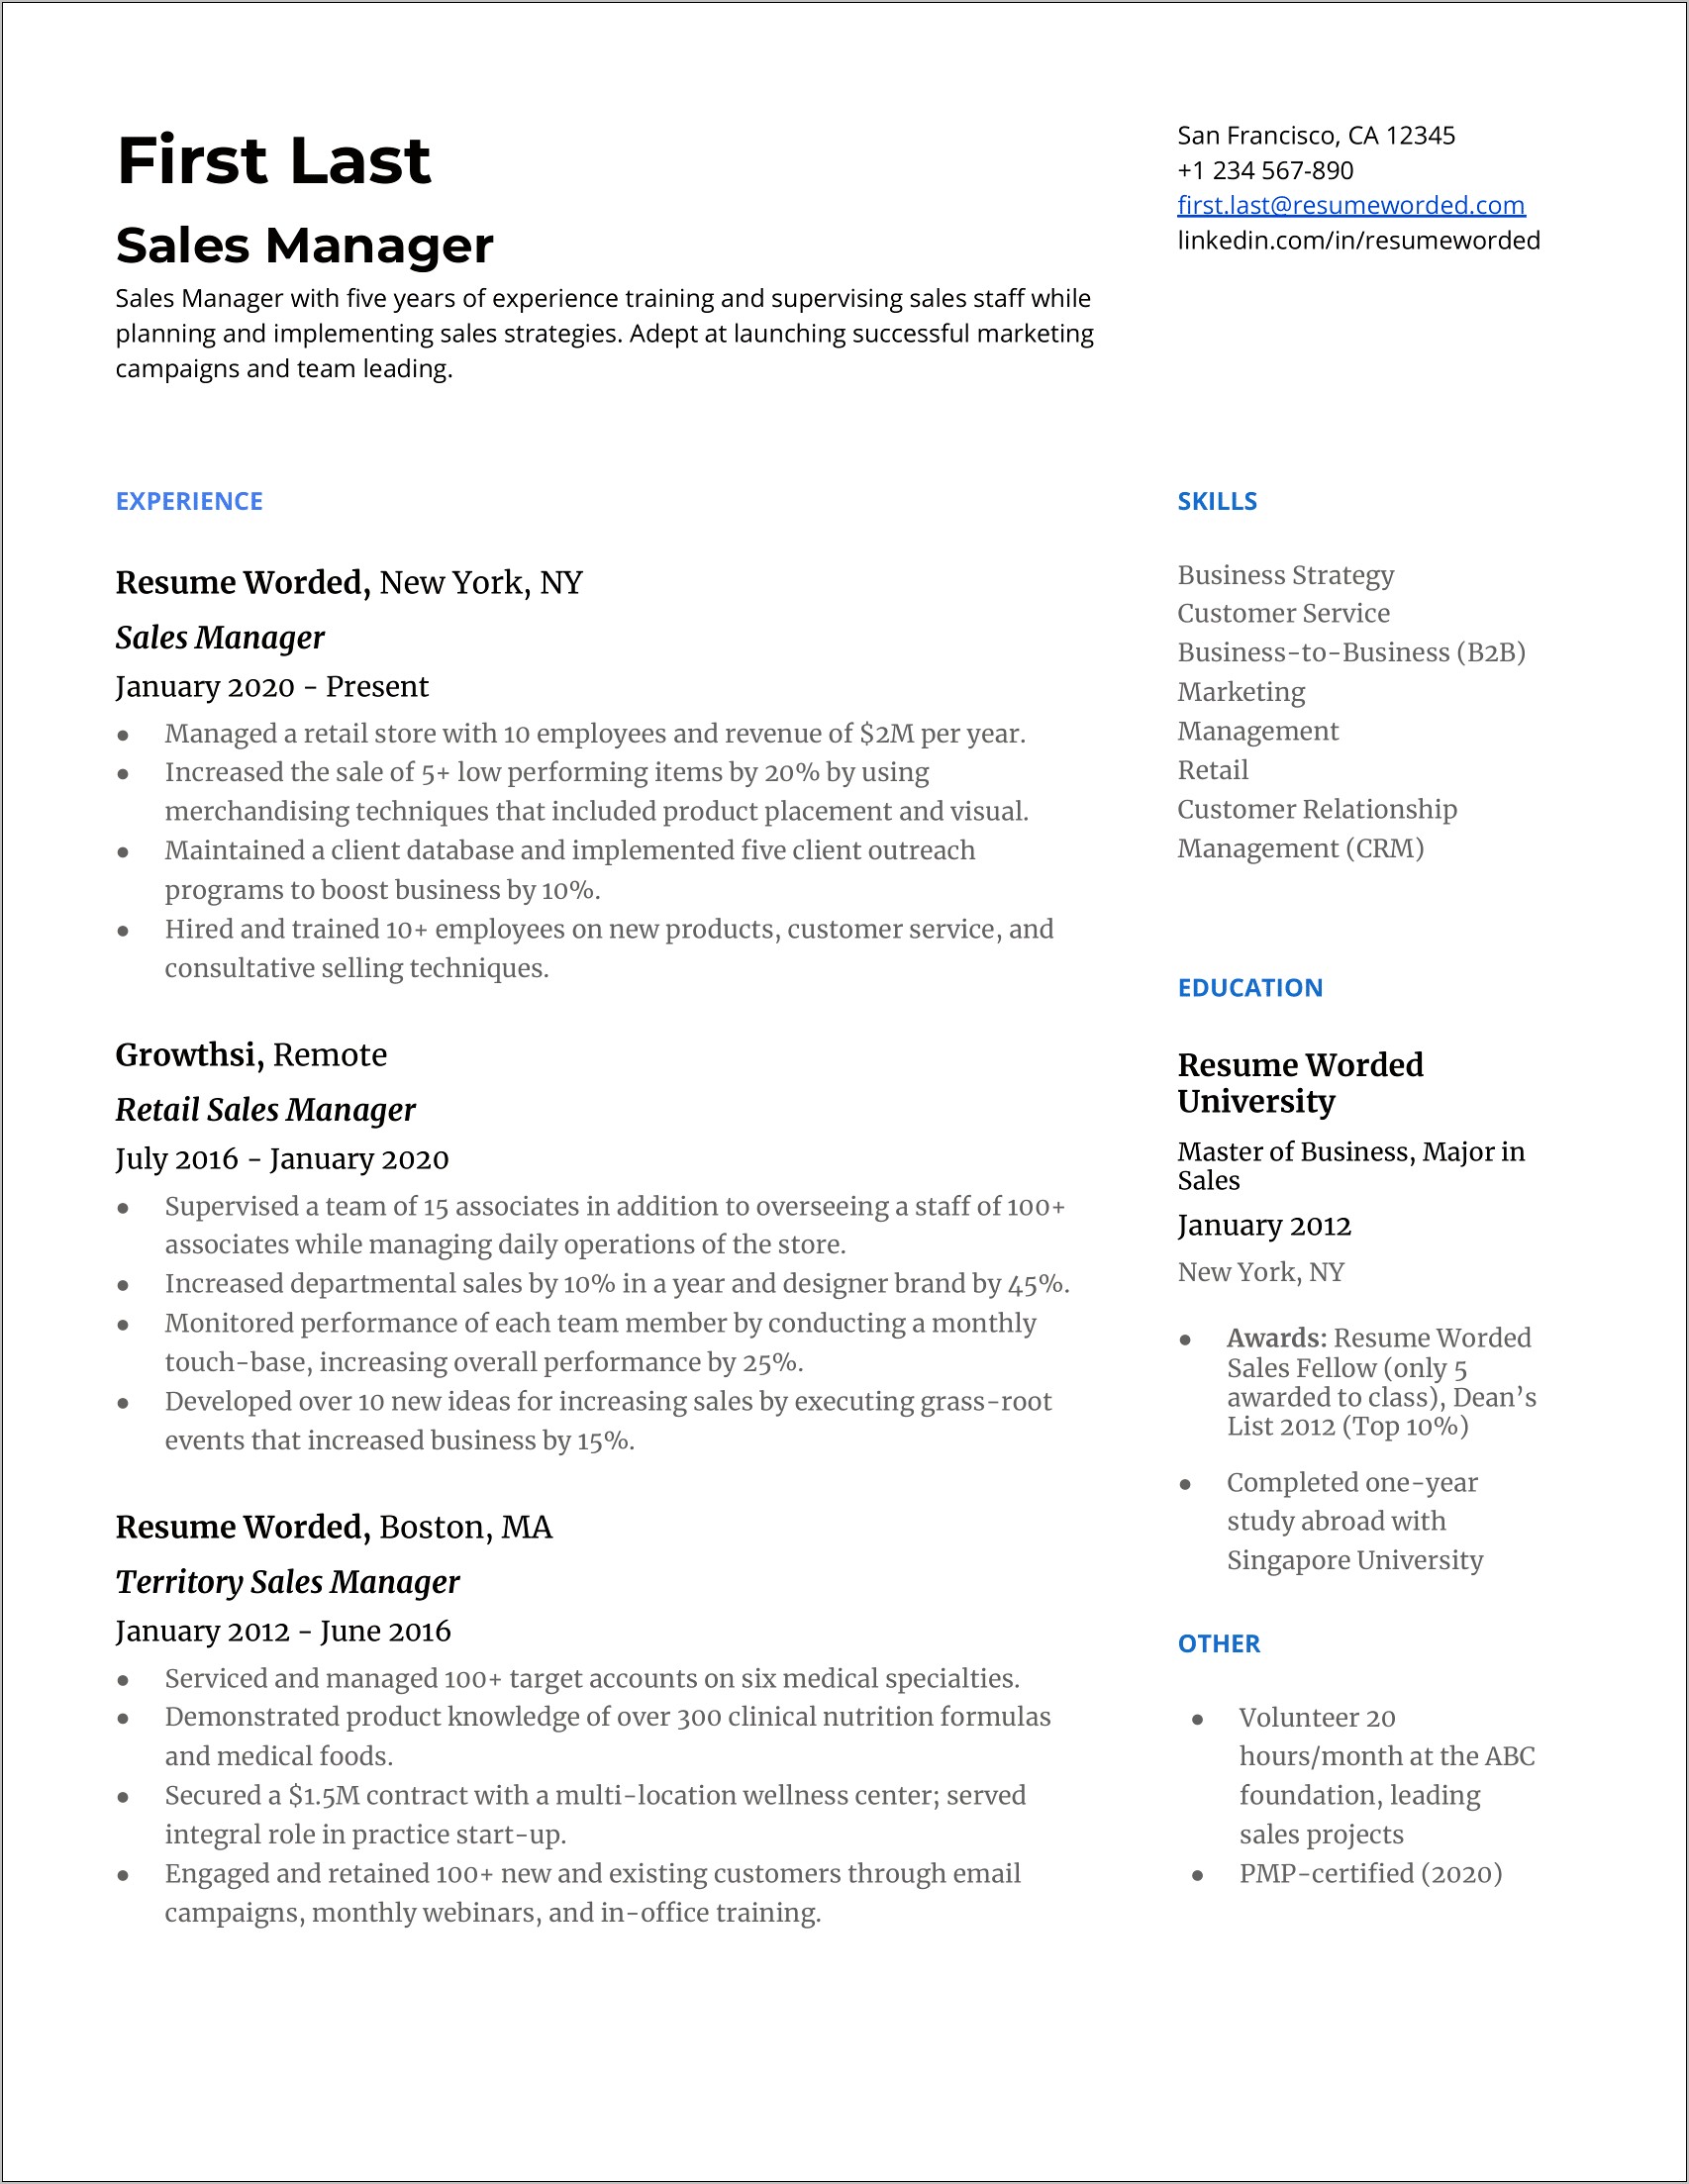 Best General Skills To Put On A Resume